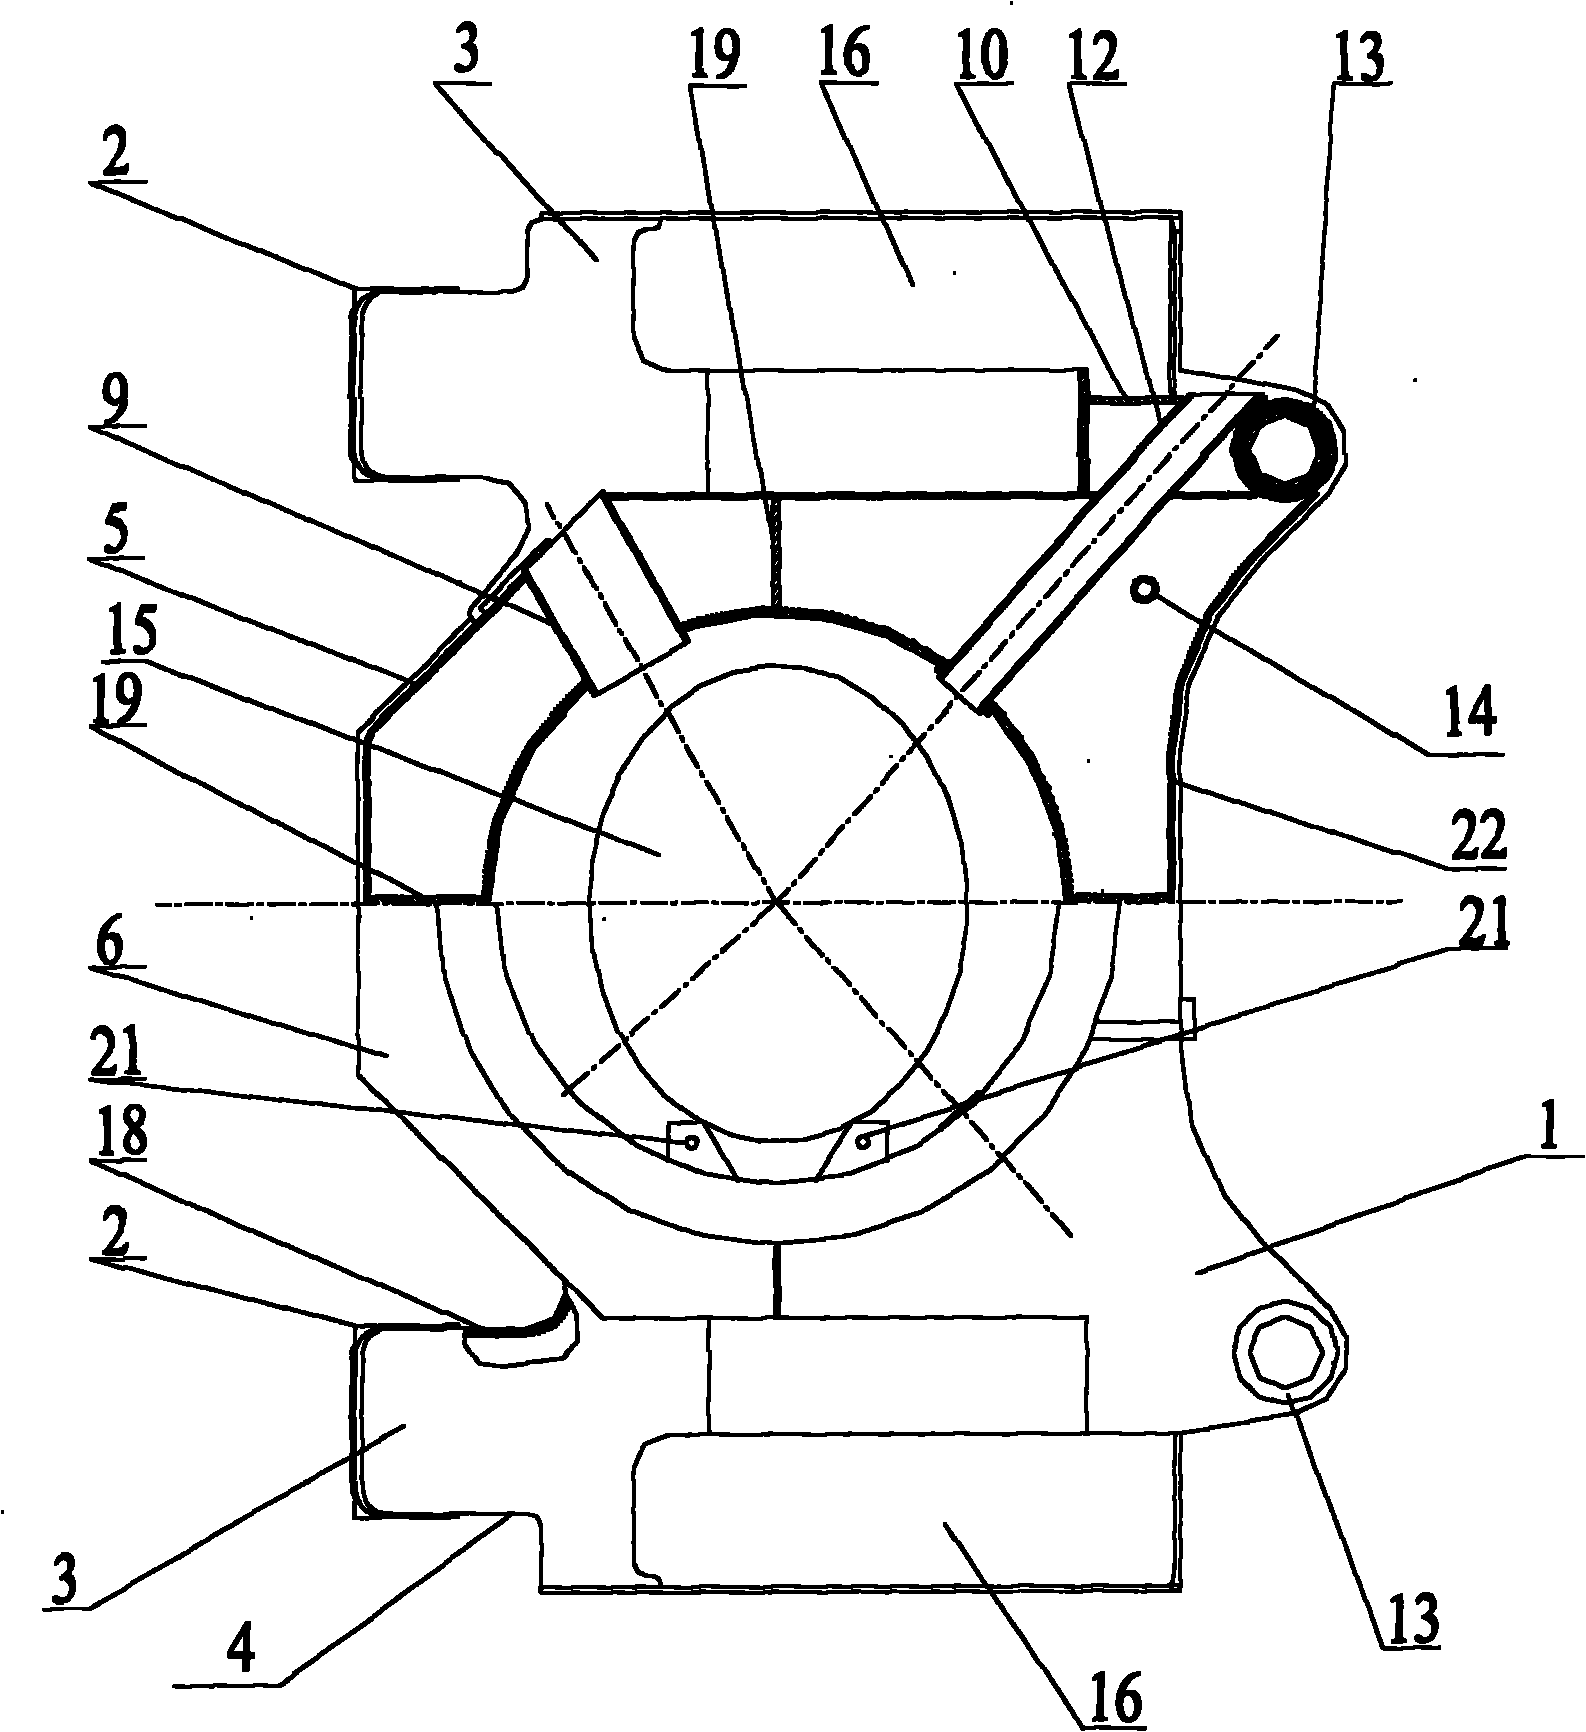 Excavator base with embedded auxiliary fuel tank